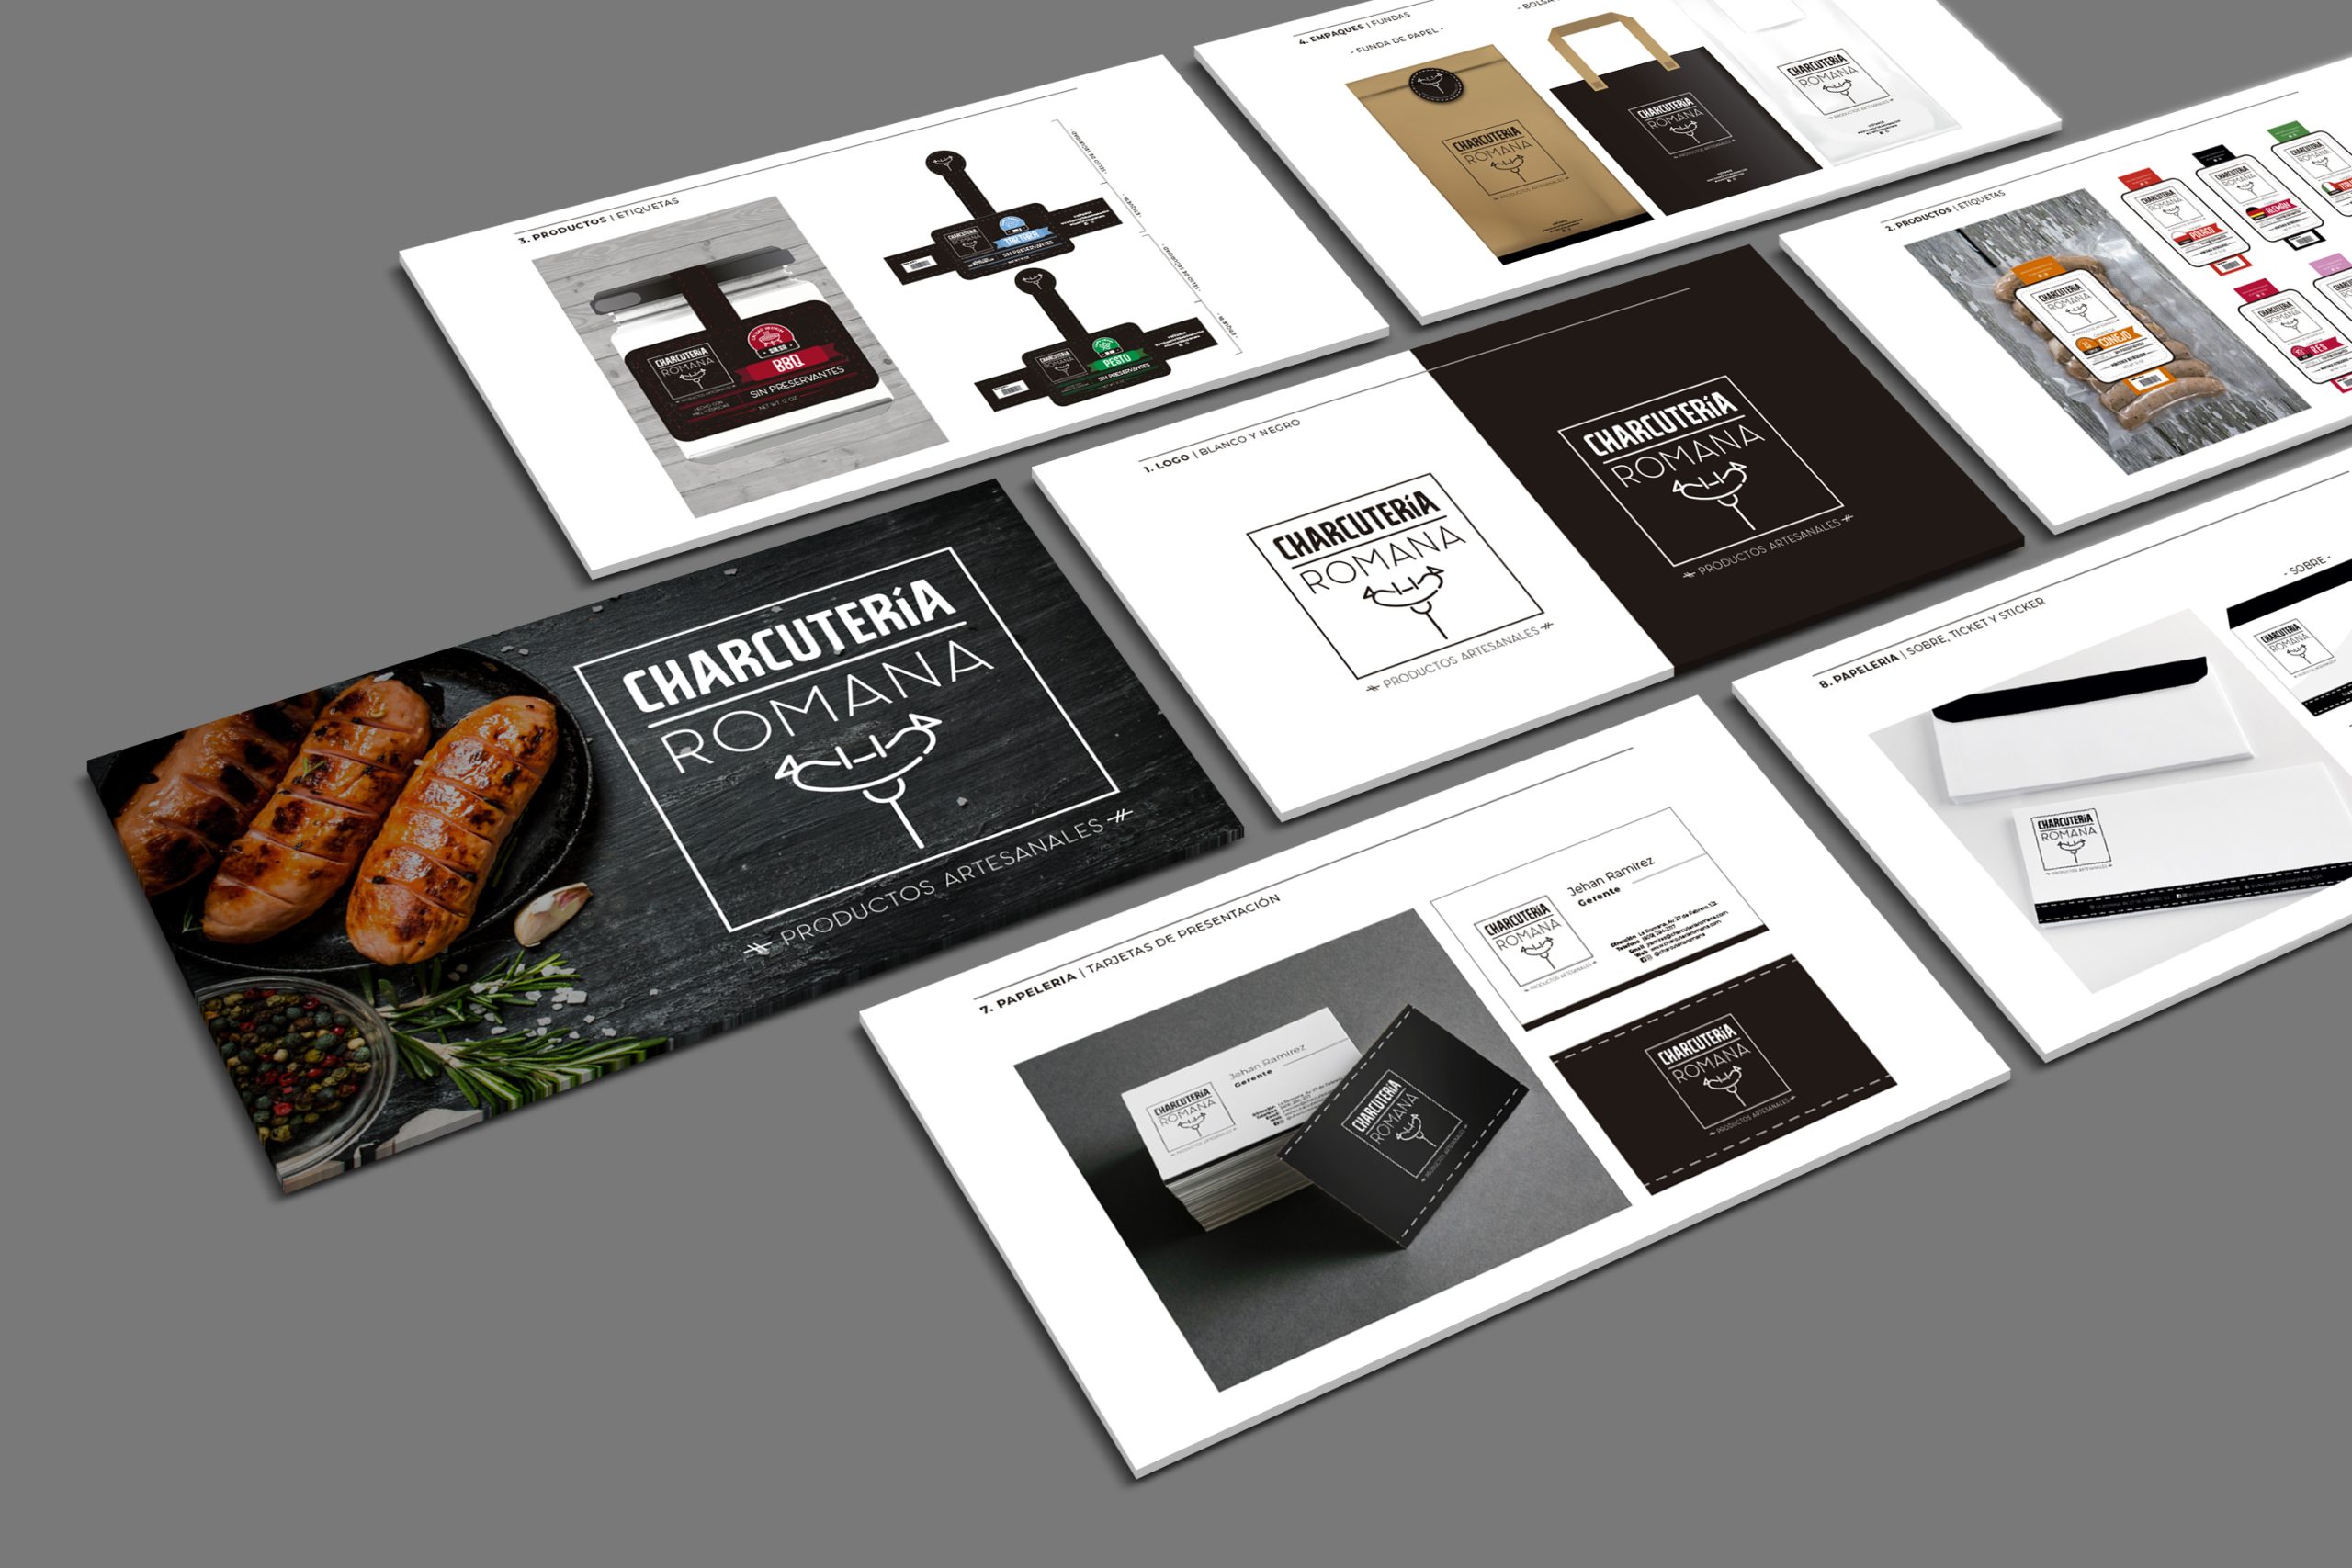 Branding and packaging design